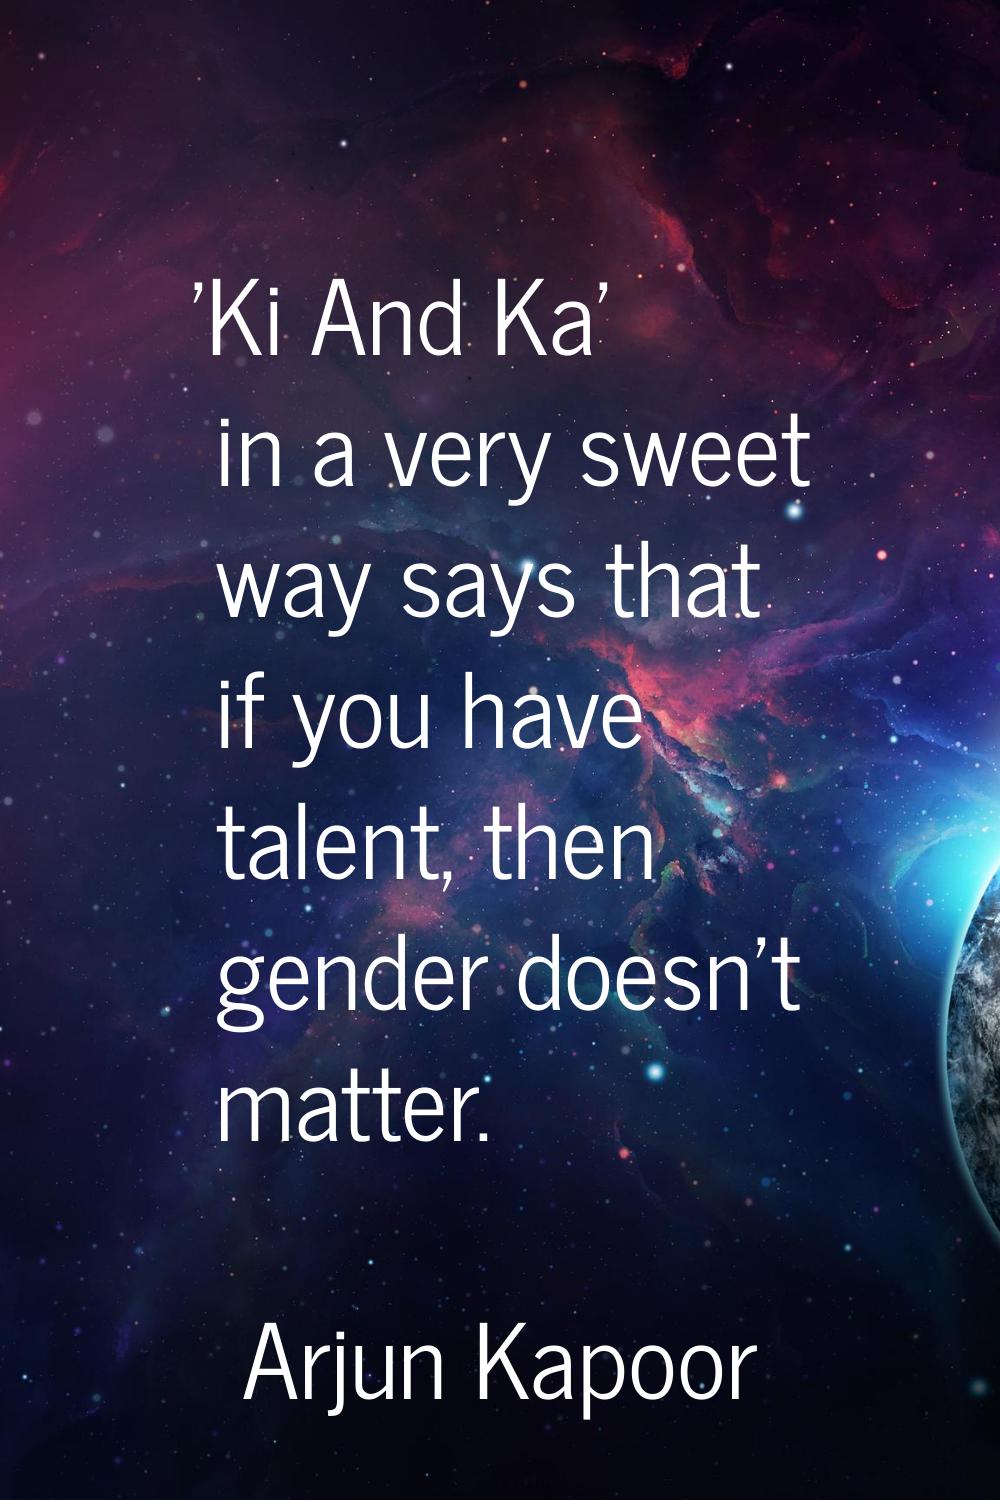 'Ki And Ka' in a very sweet way says that if you have talent, then gender doesn't matter.